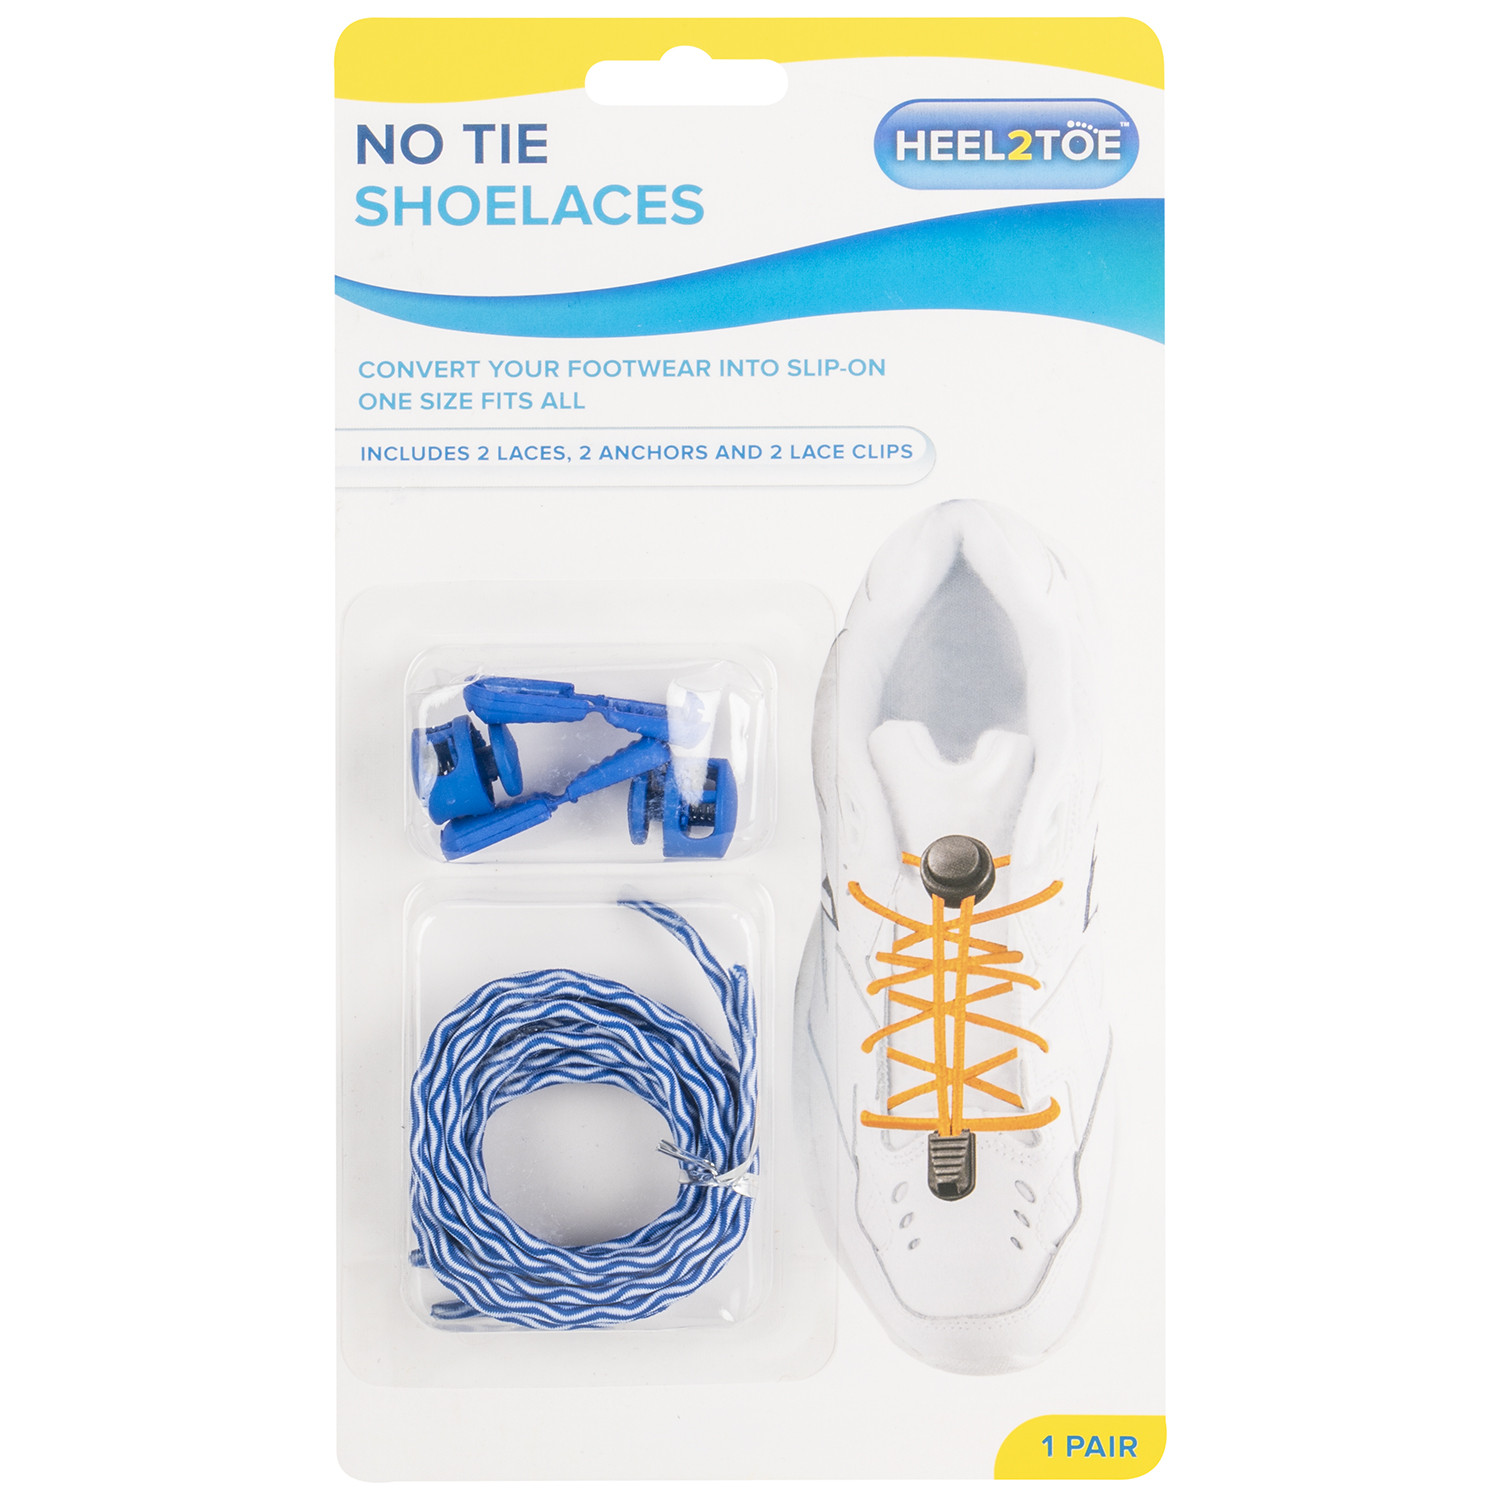 No Tie Shoe Laces With Anchors and Clips Image 1